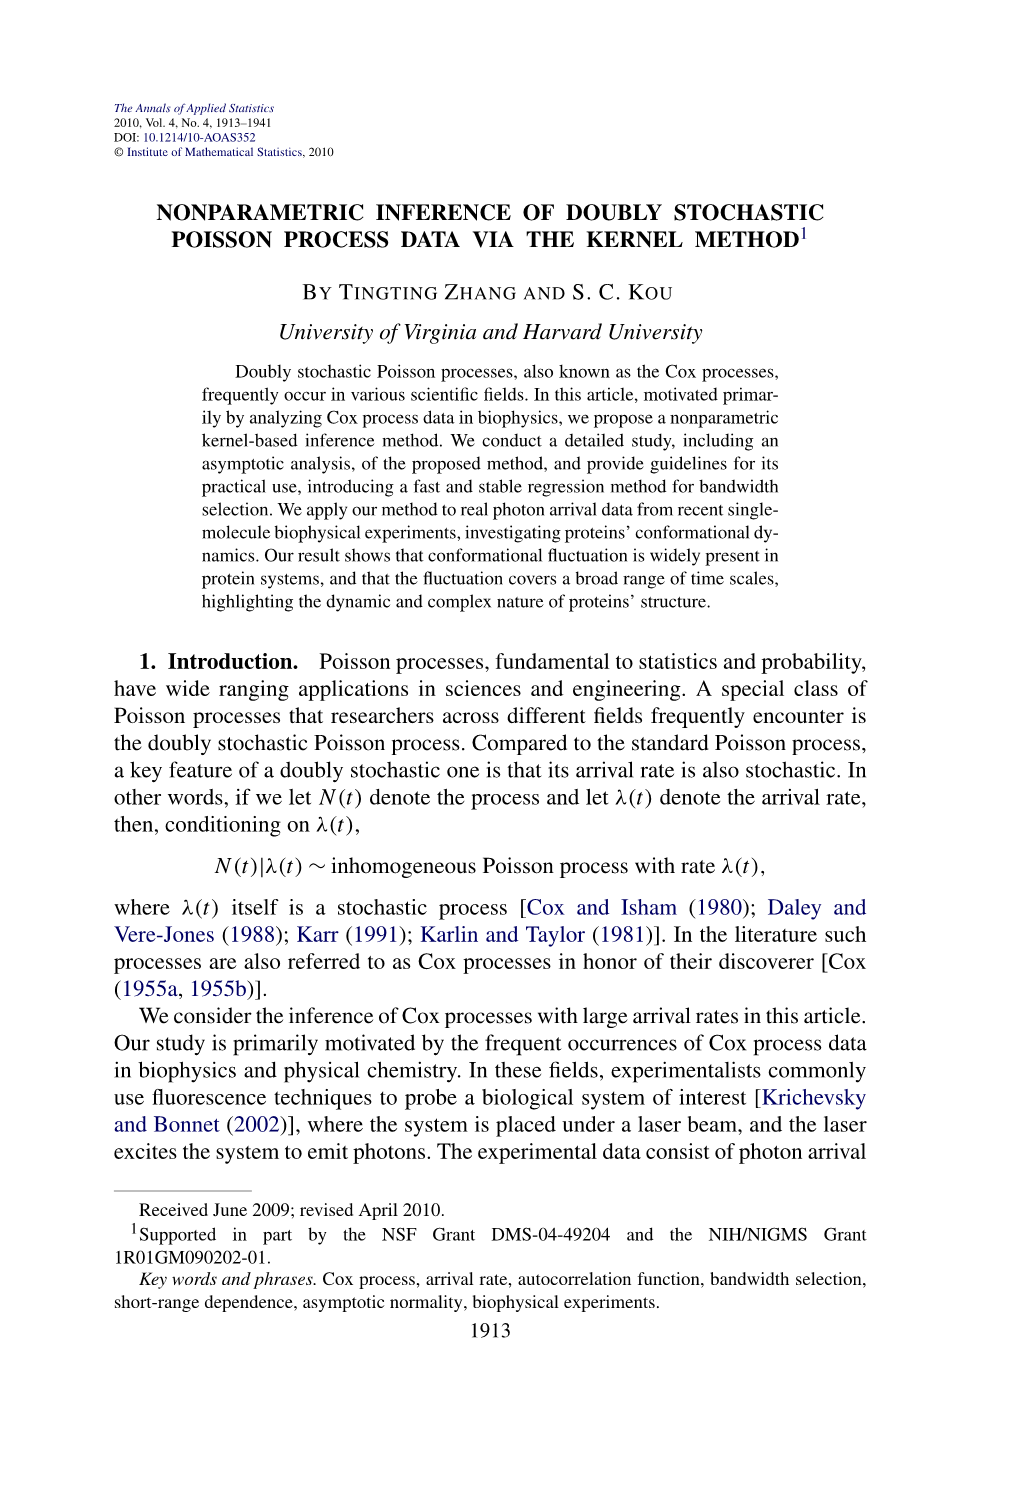 Nonparametric Inference of Doubly Stochastic Poisson Process Data Via the Kernel Method1